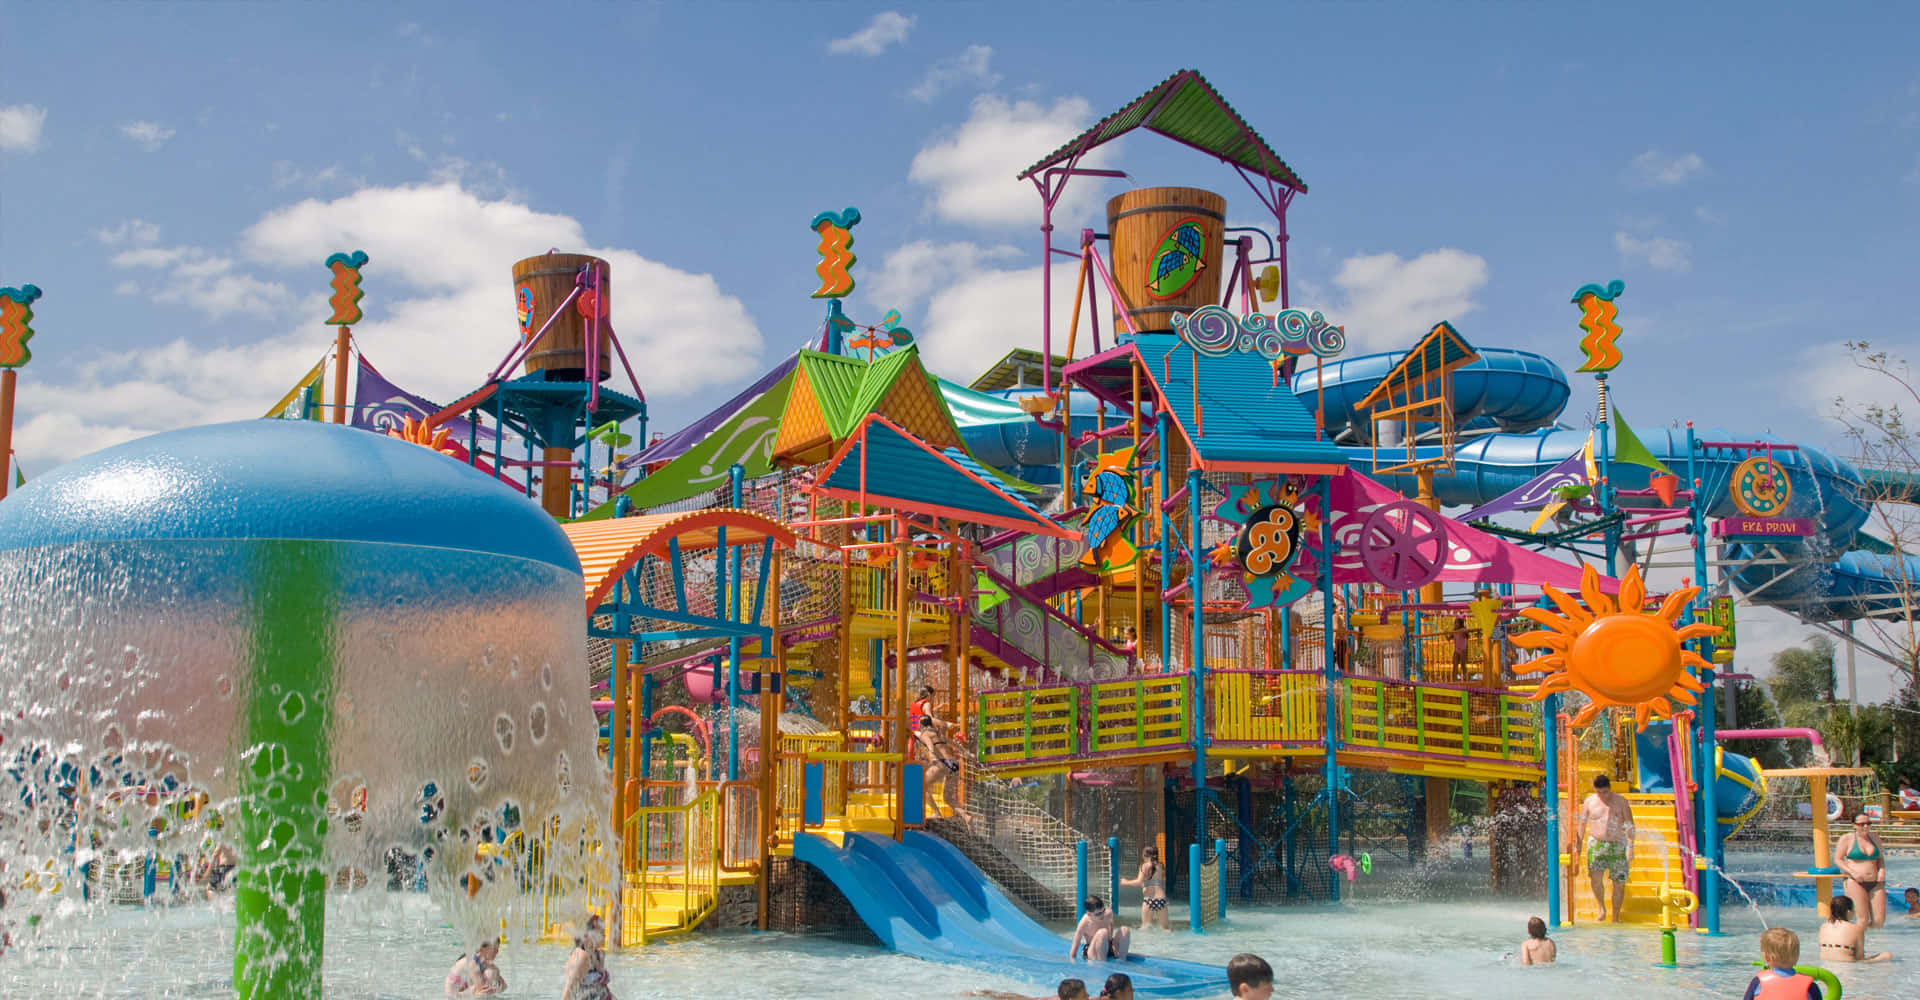 A Water Park With Many Children And A Water Slide